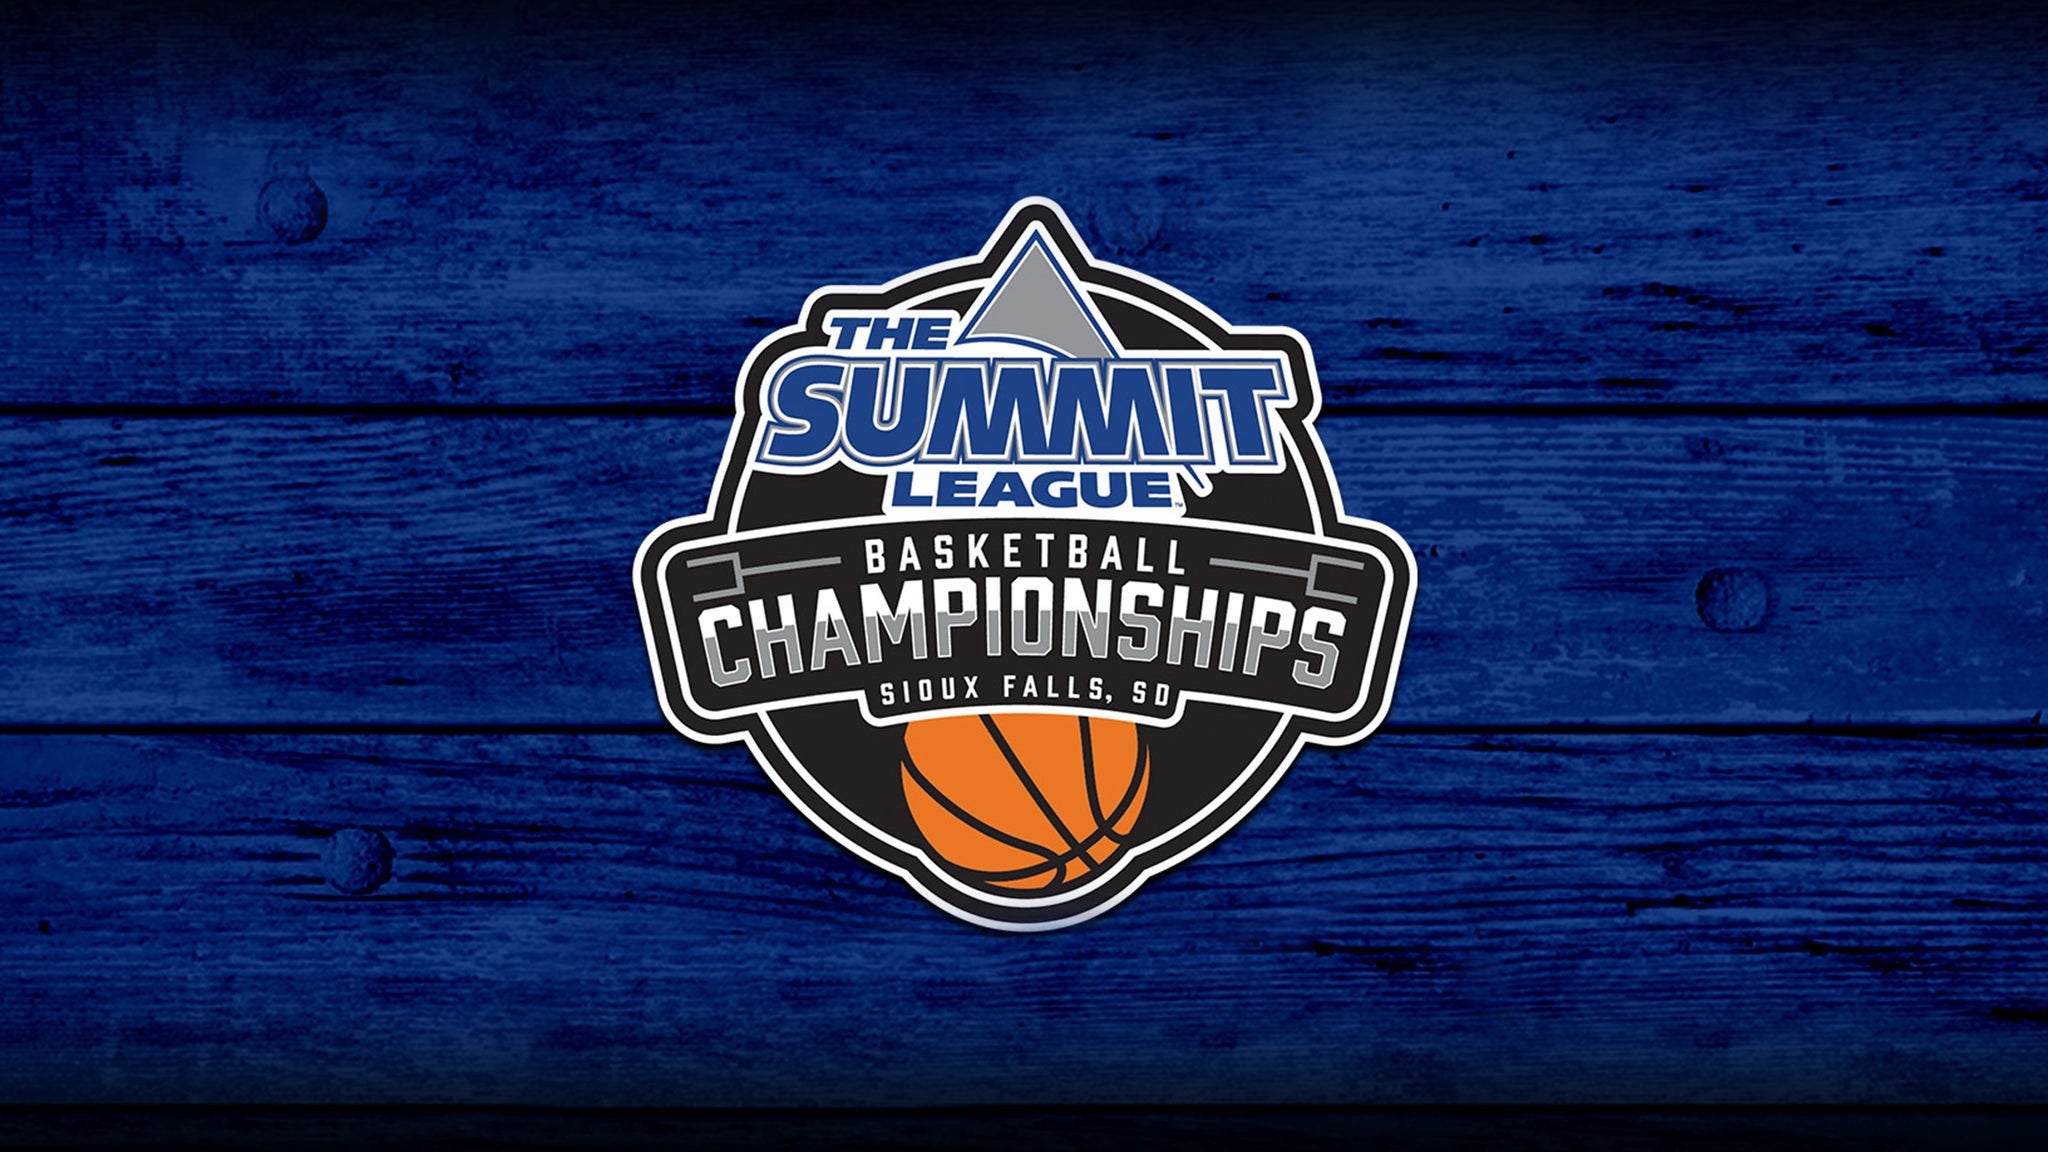 Summit League Basketball 2023 Tournament - 5 Day Ticket in Sioux Falls promo photo for Exclusive presale offer code